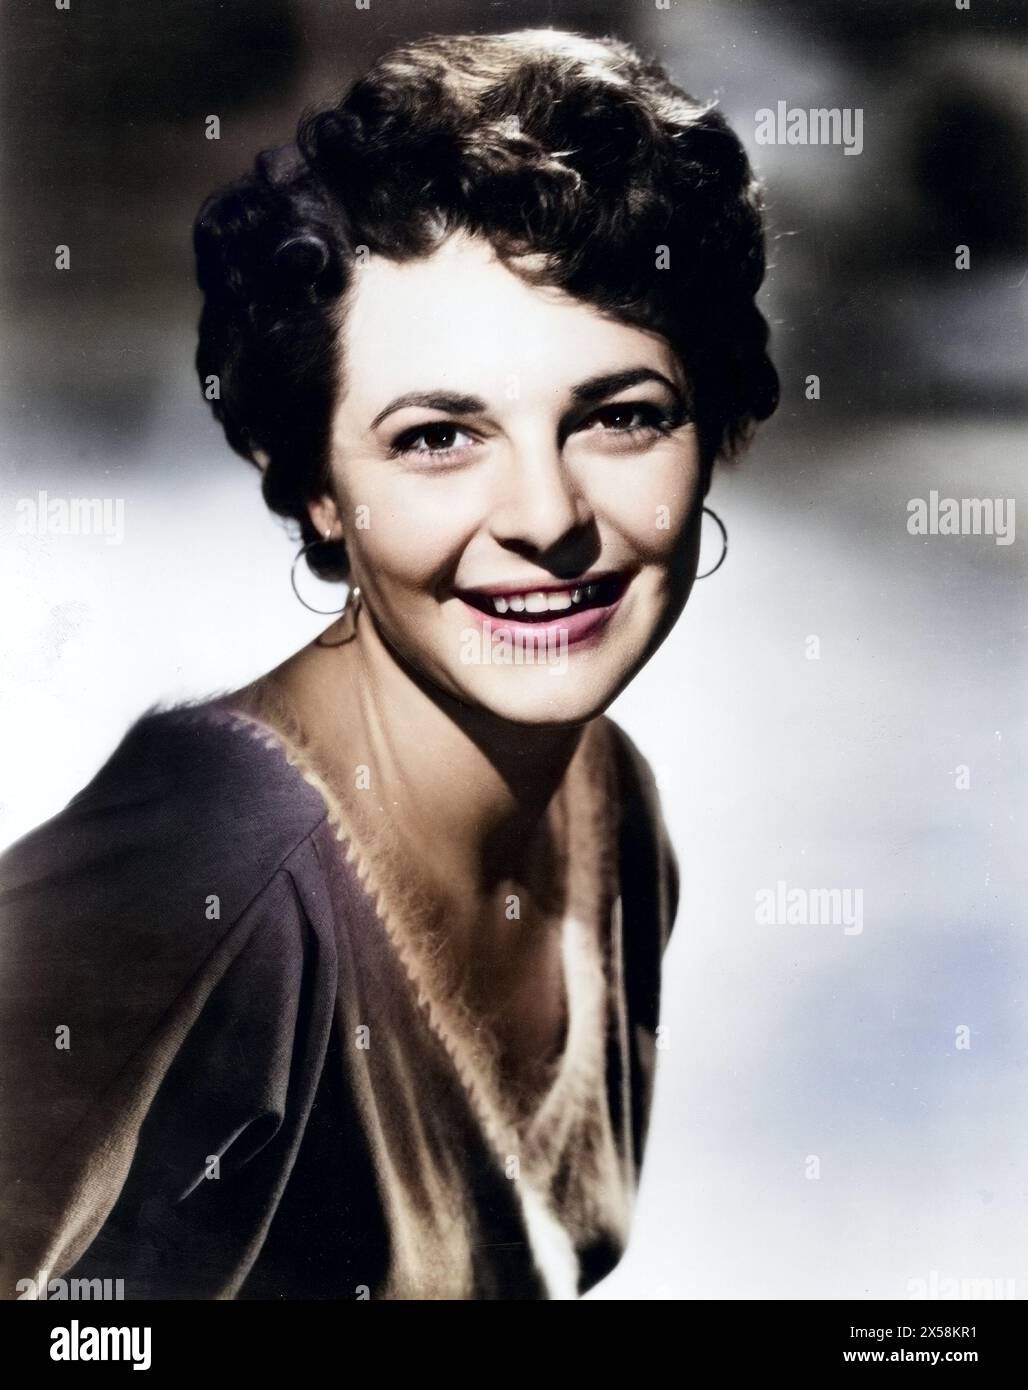 Bancroft, Anne, * 17.9.1931 - 6.6.2005, American actress, portrait, 1950s, ADDITIONAL-RIGHTS-CLEARANCE-INFO-NOT-AVAILABLE Stock Photo